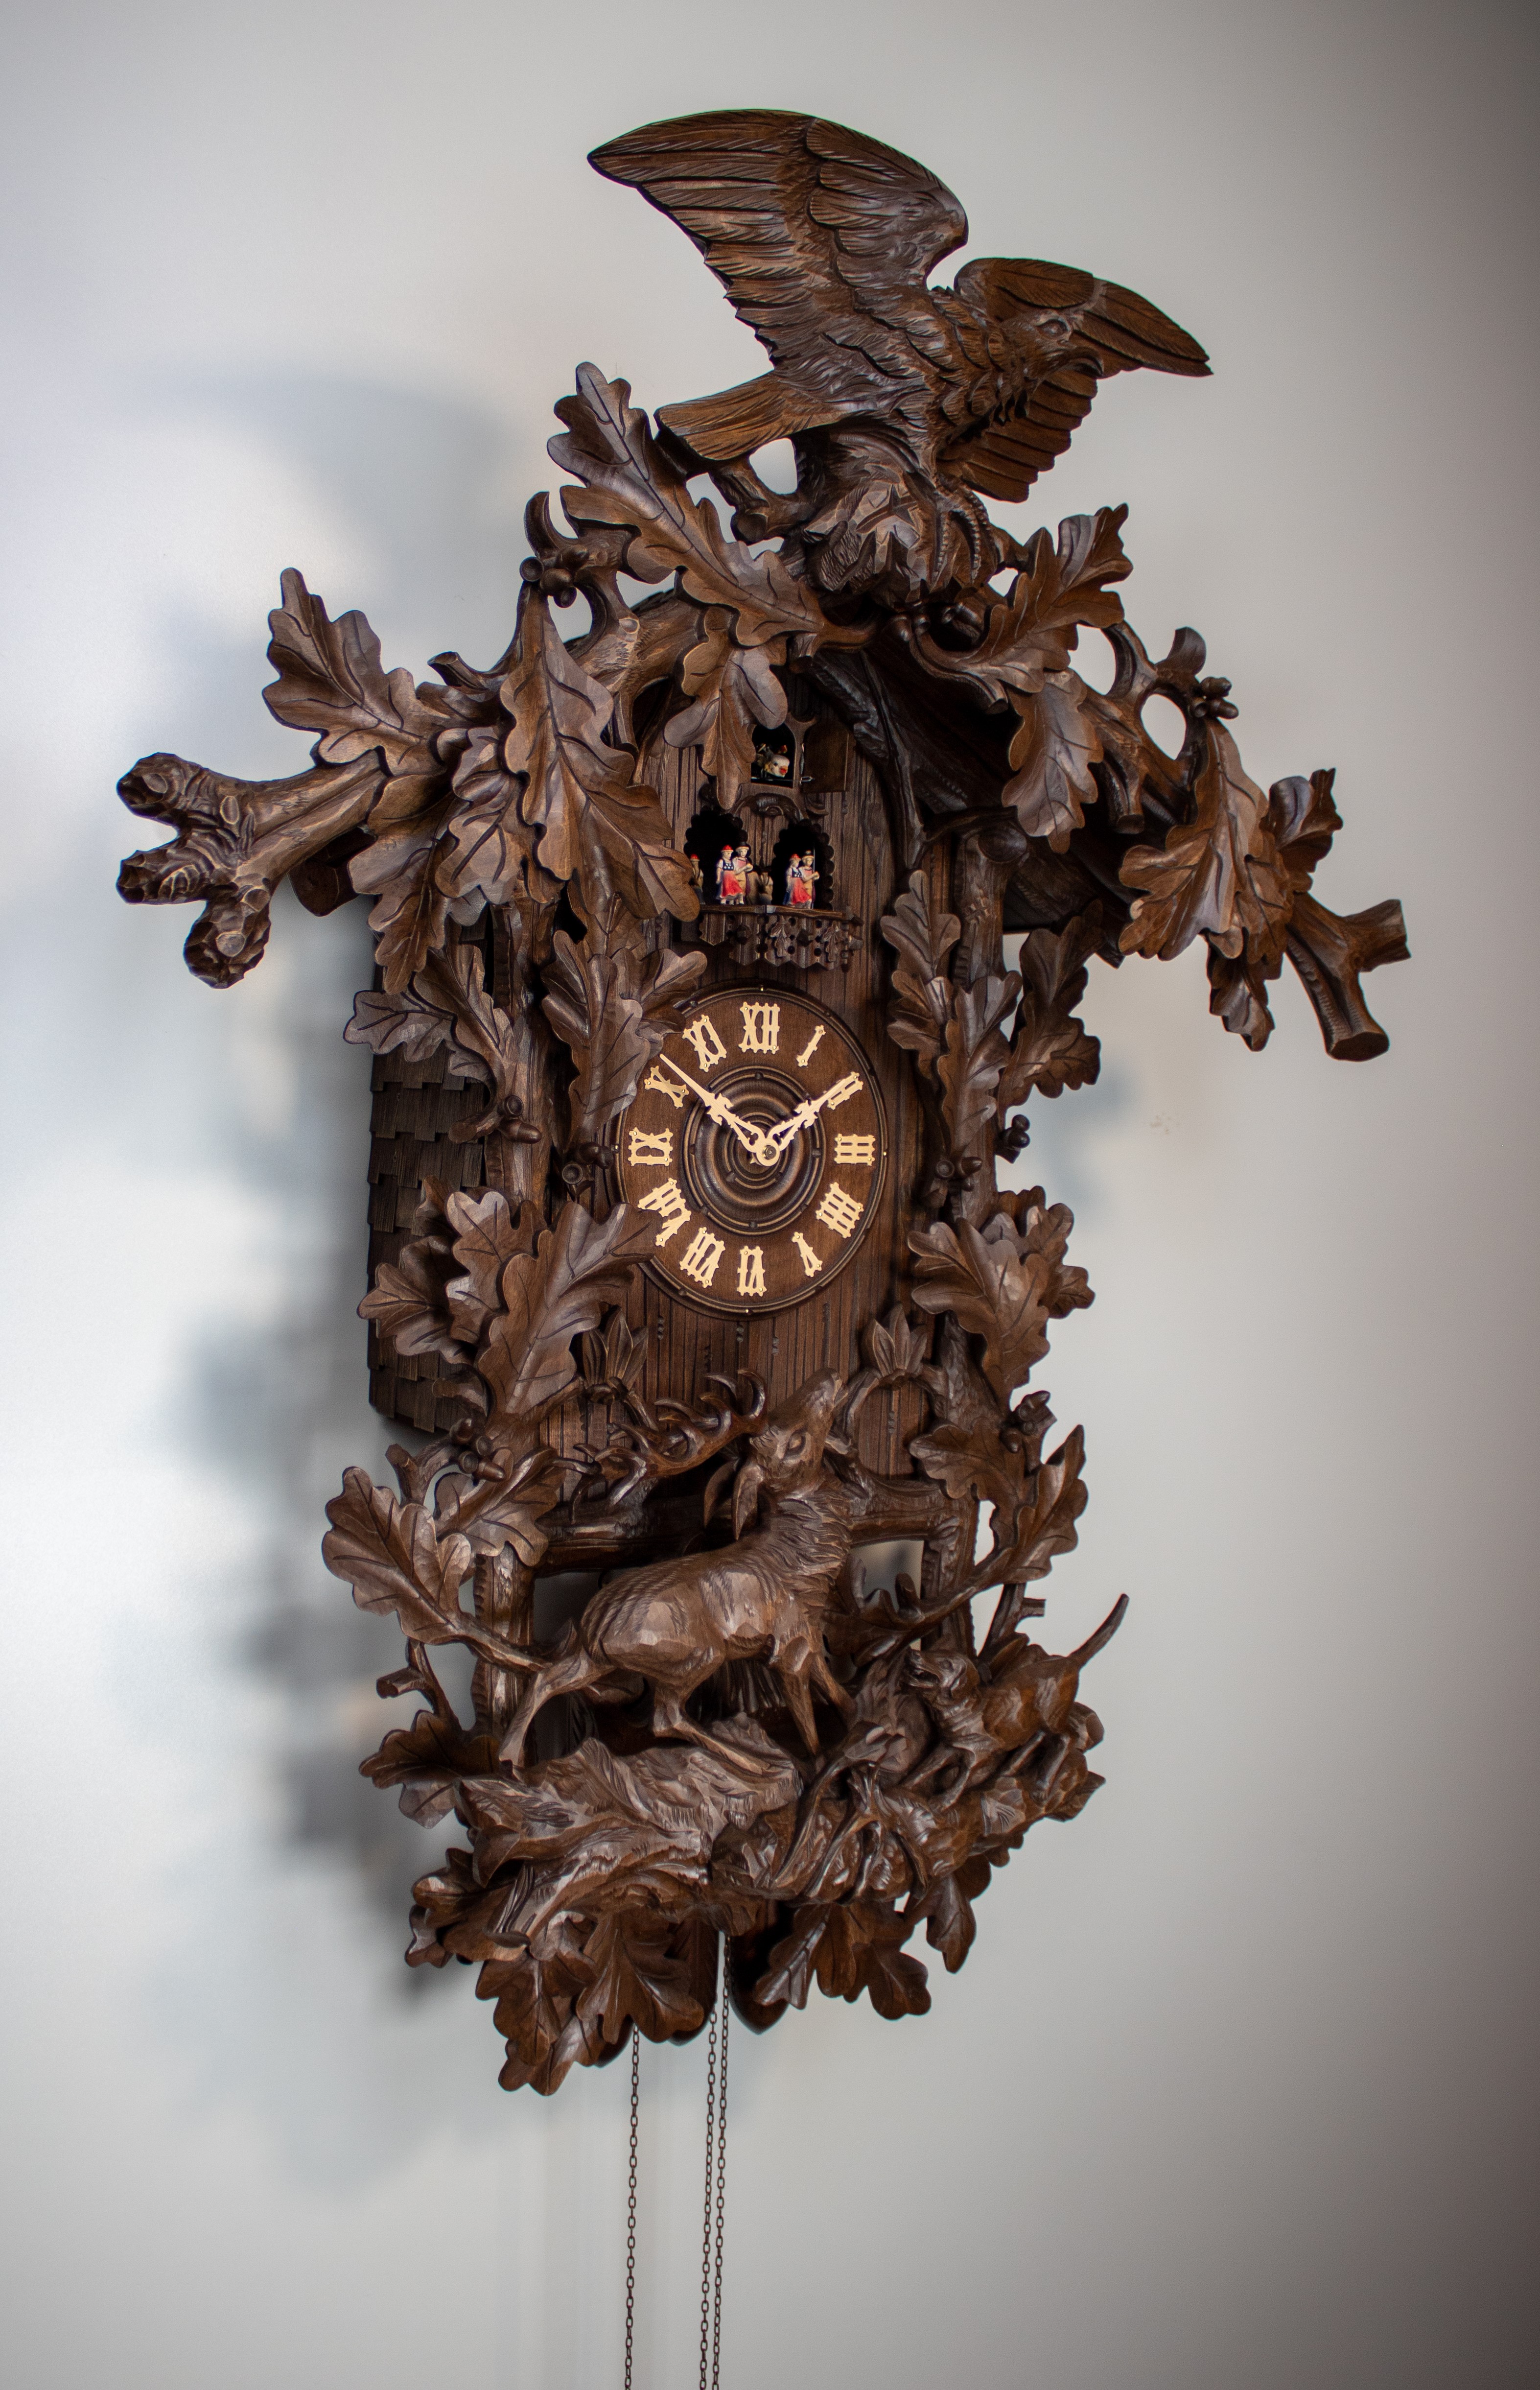 Historical 8 Days Music Dancer Cuckoo Clock with eagle and hunting scene with deer and hunting dog